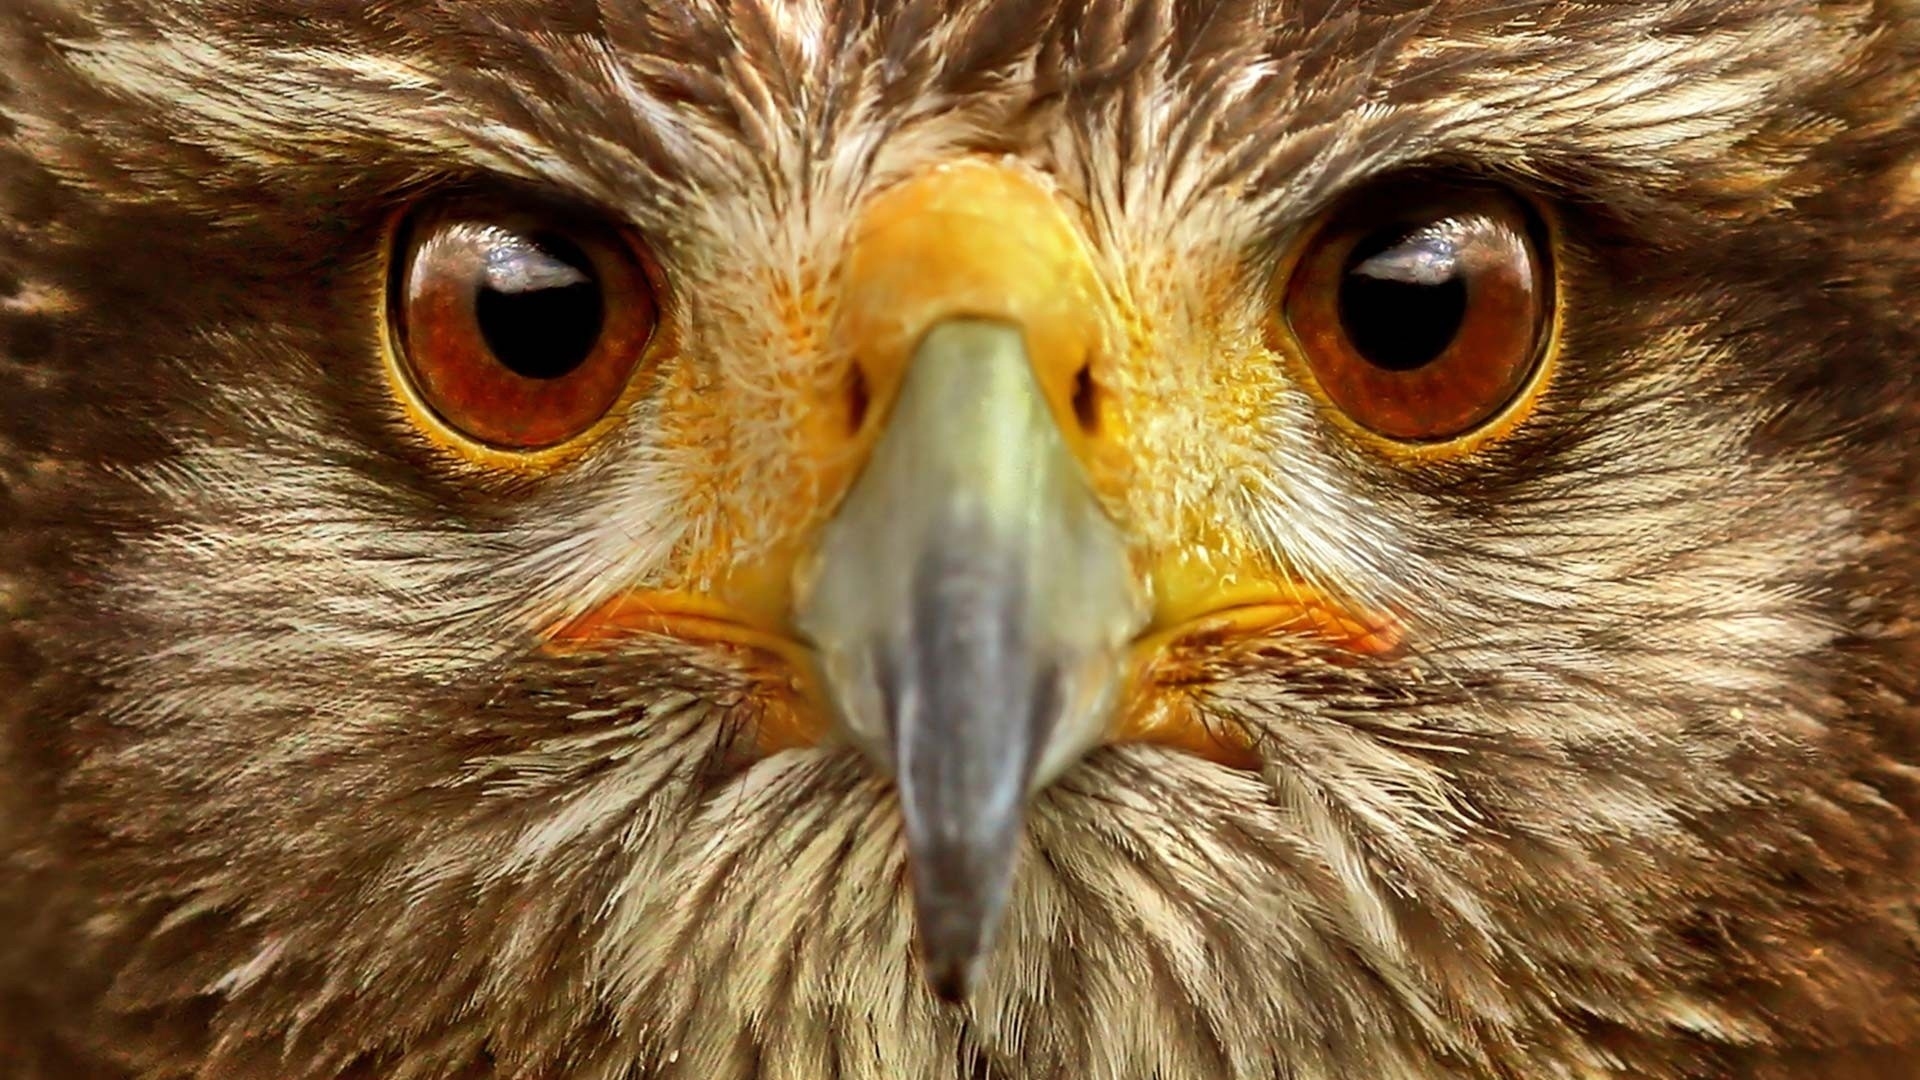 Eagle Close Up for 1920 x 1080 HDTV 1080p resolution